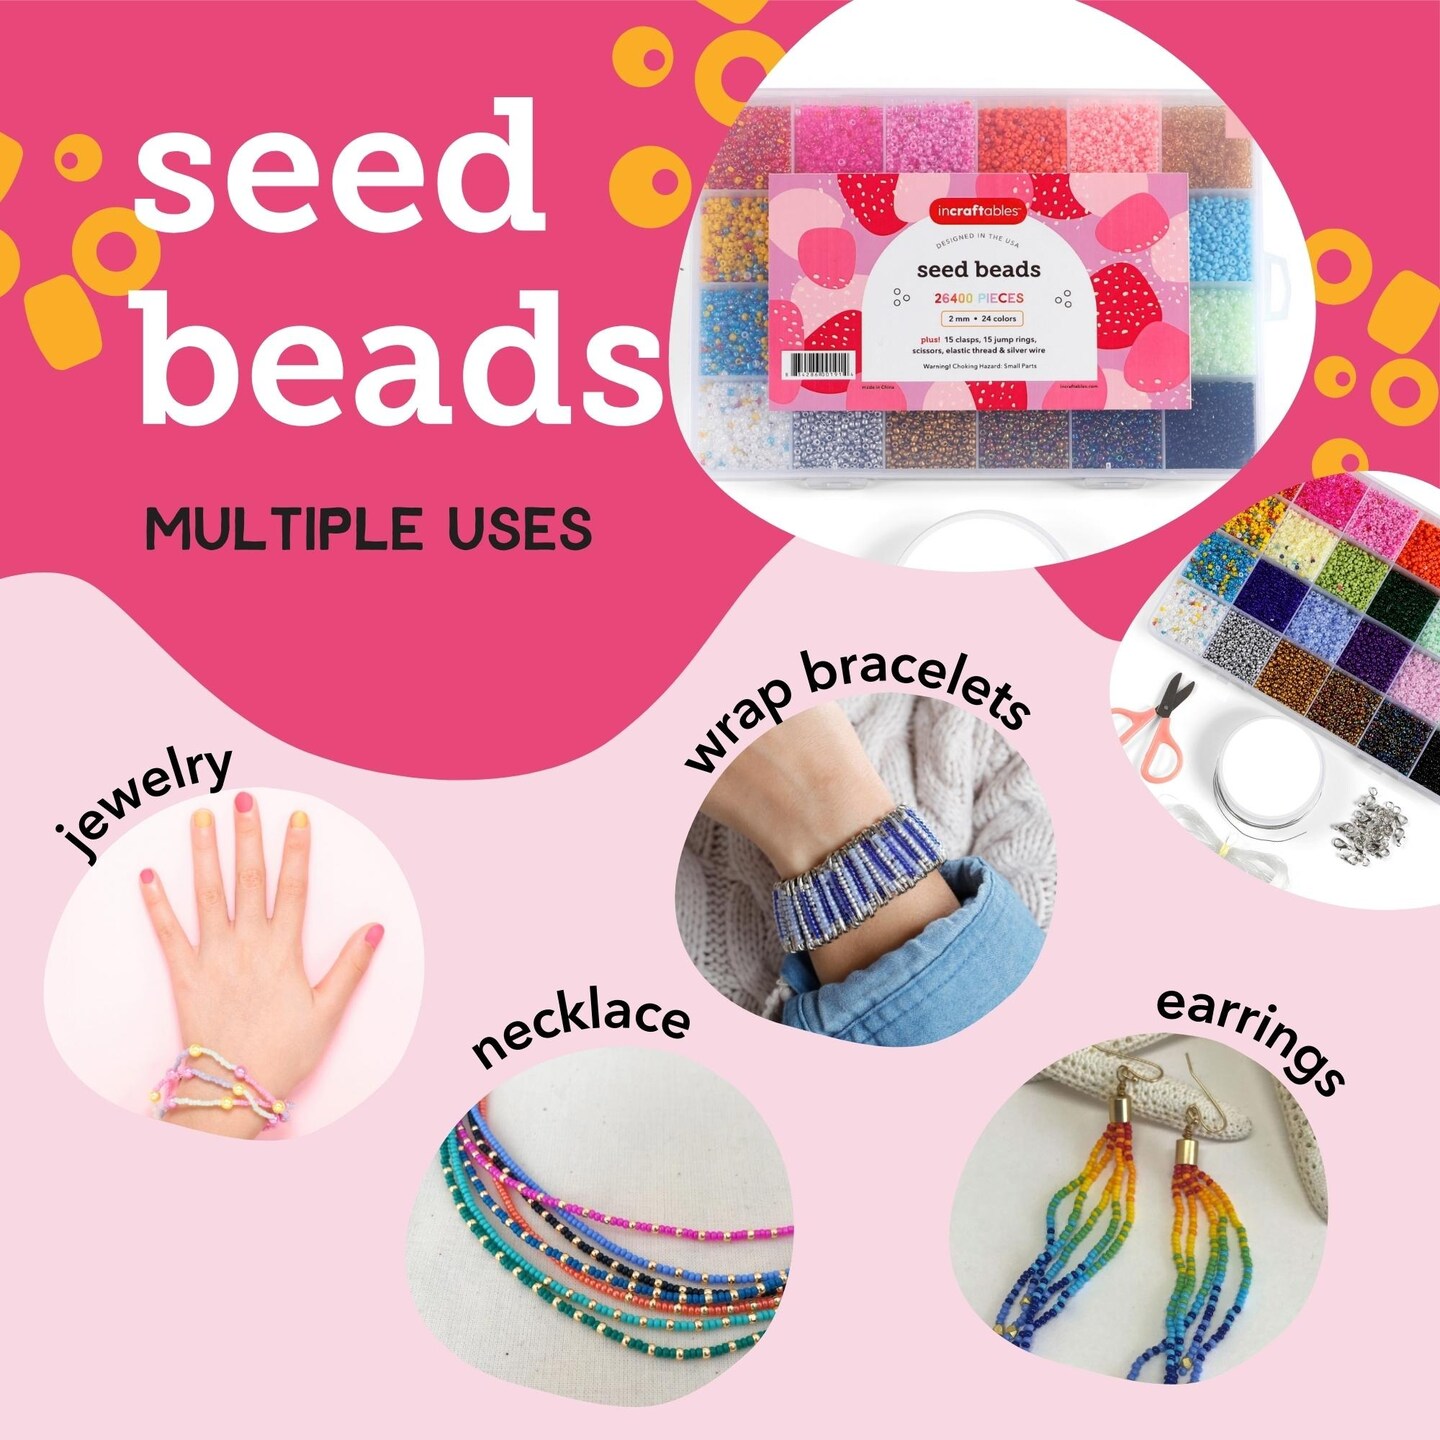 Acrylic Seed Beads Kit For Needlework Craft Small Beads Kit For